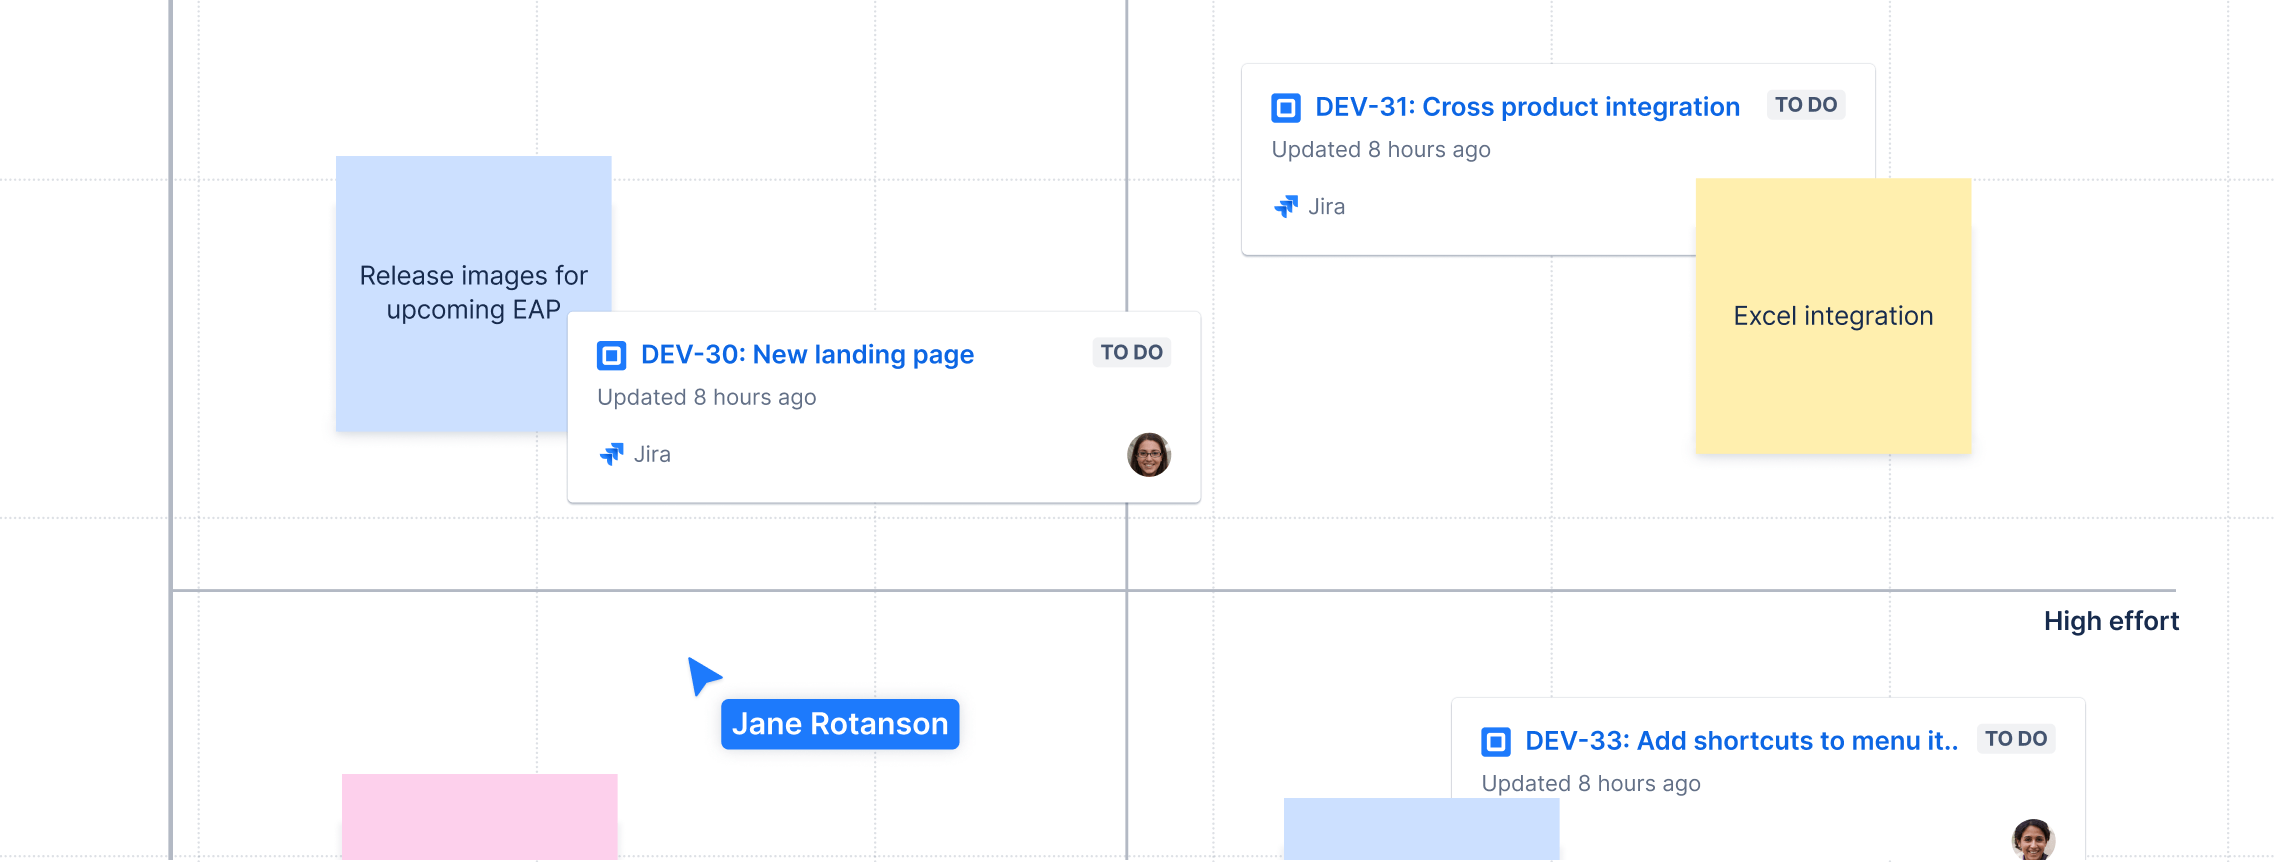 Connect with Jira on whiteboards